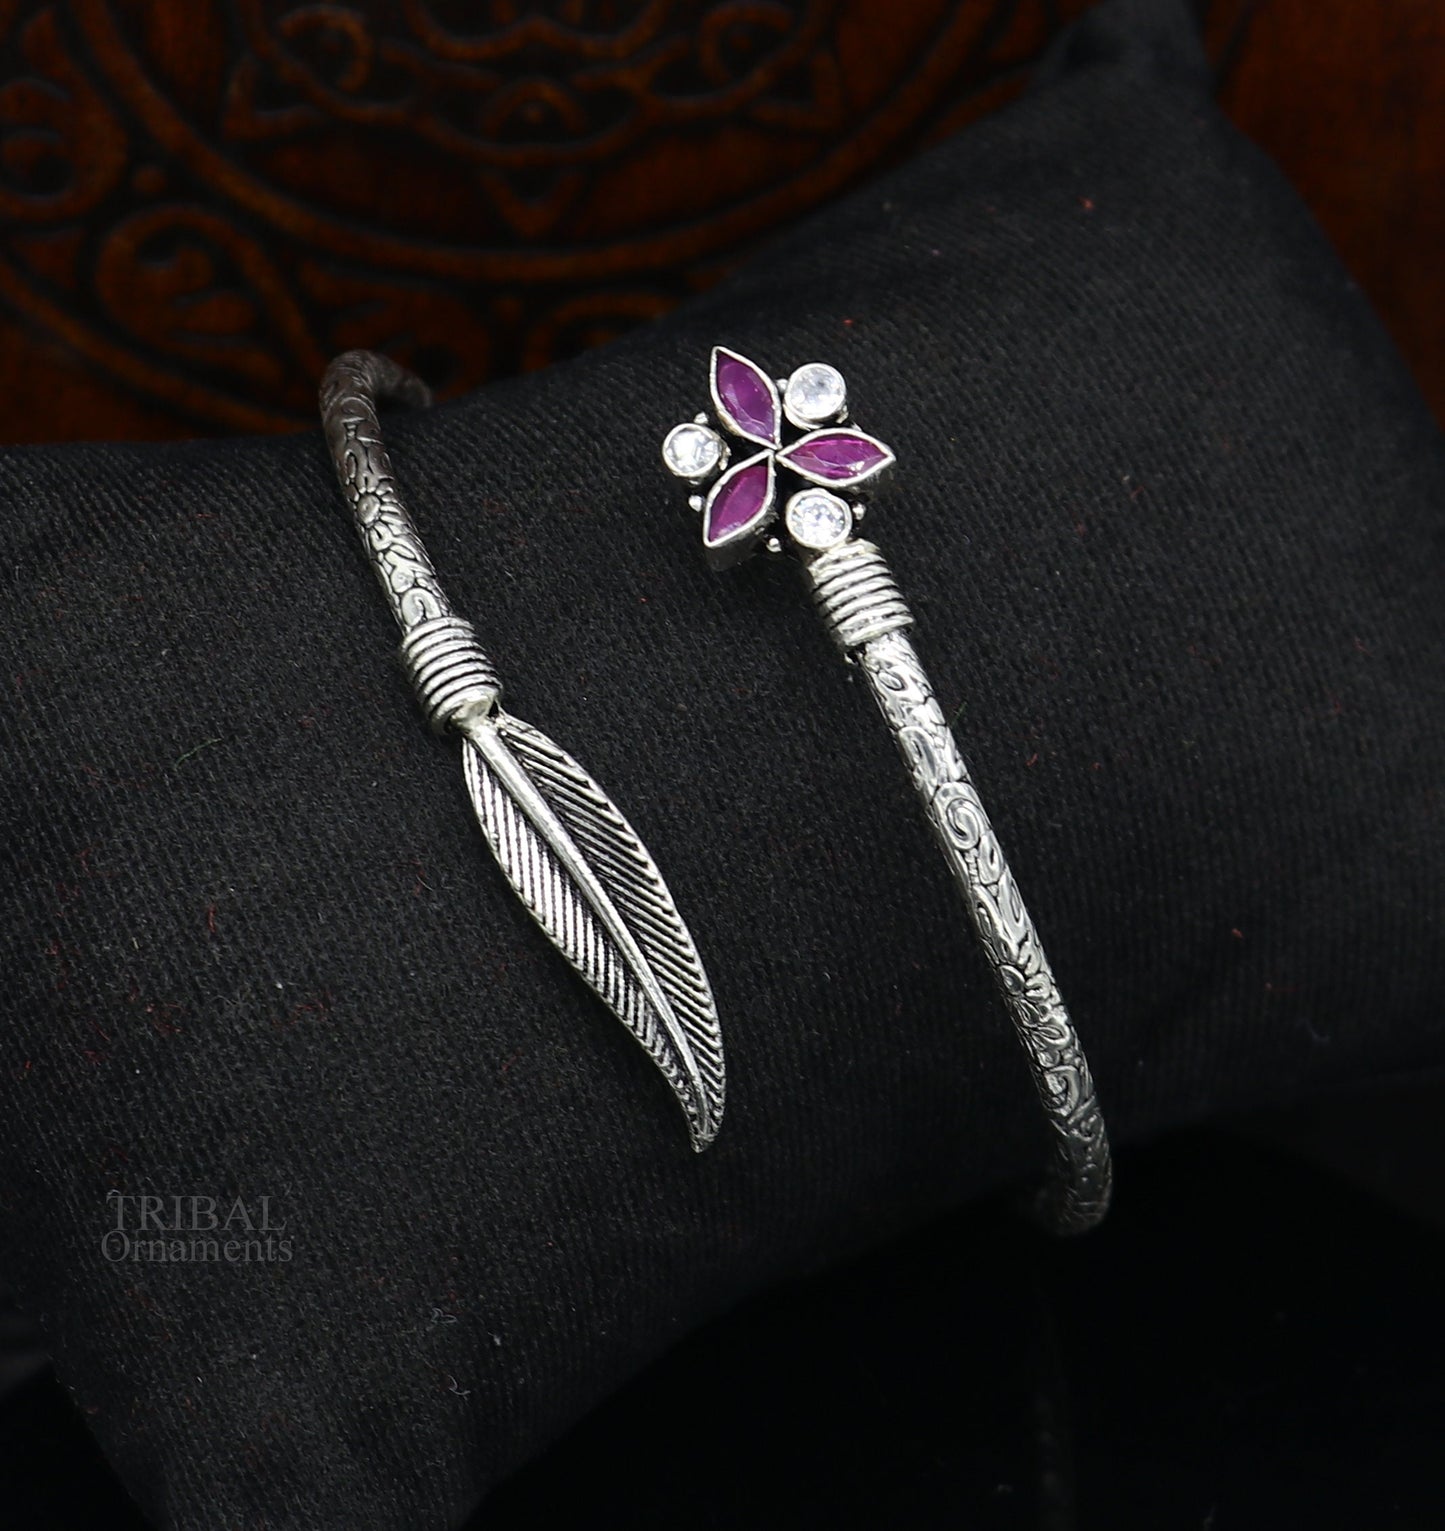 Feather style 925 sterling silver exclusive design handmade bangle bracelet, easy to plug with your wrist, pure silver kada jewelry nssk669 - TRIBAL ORNAMENTS